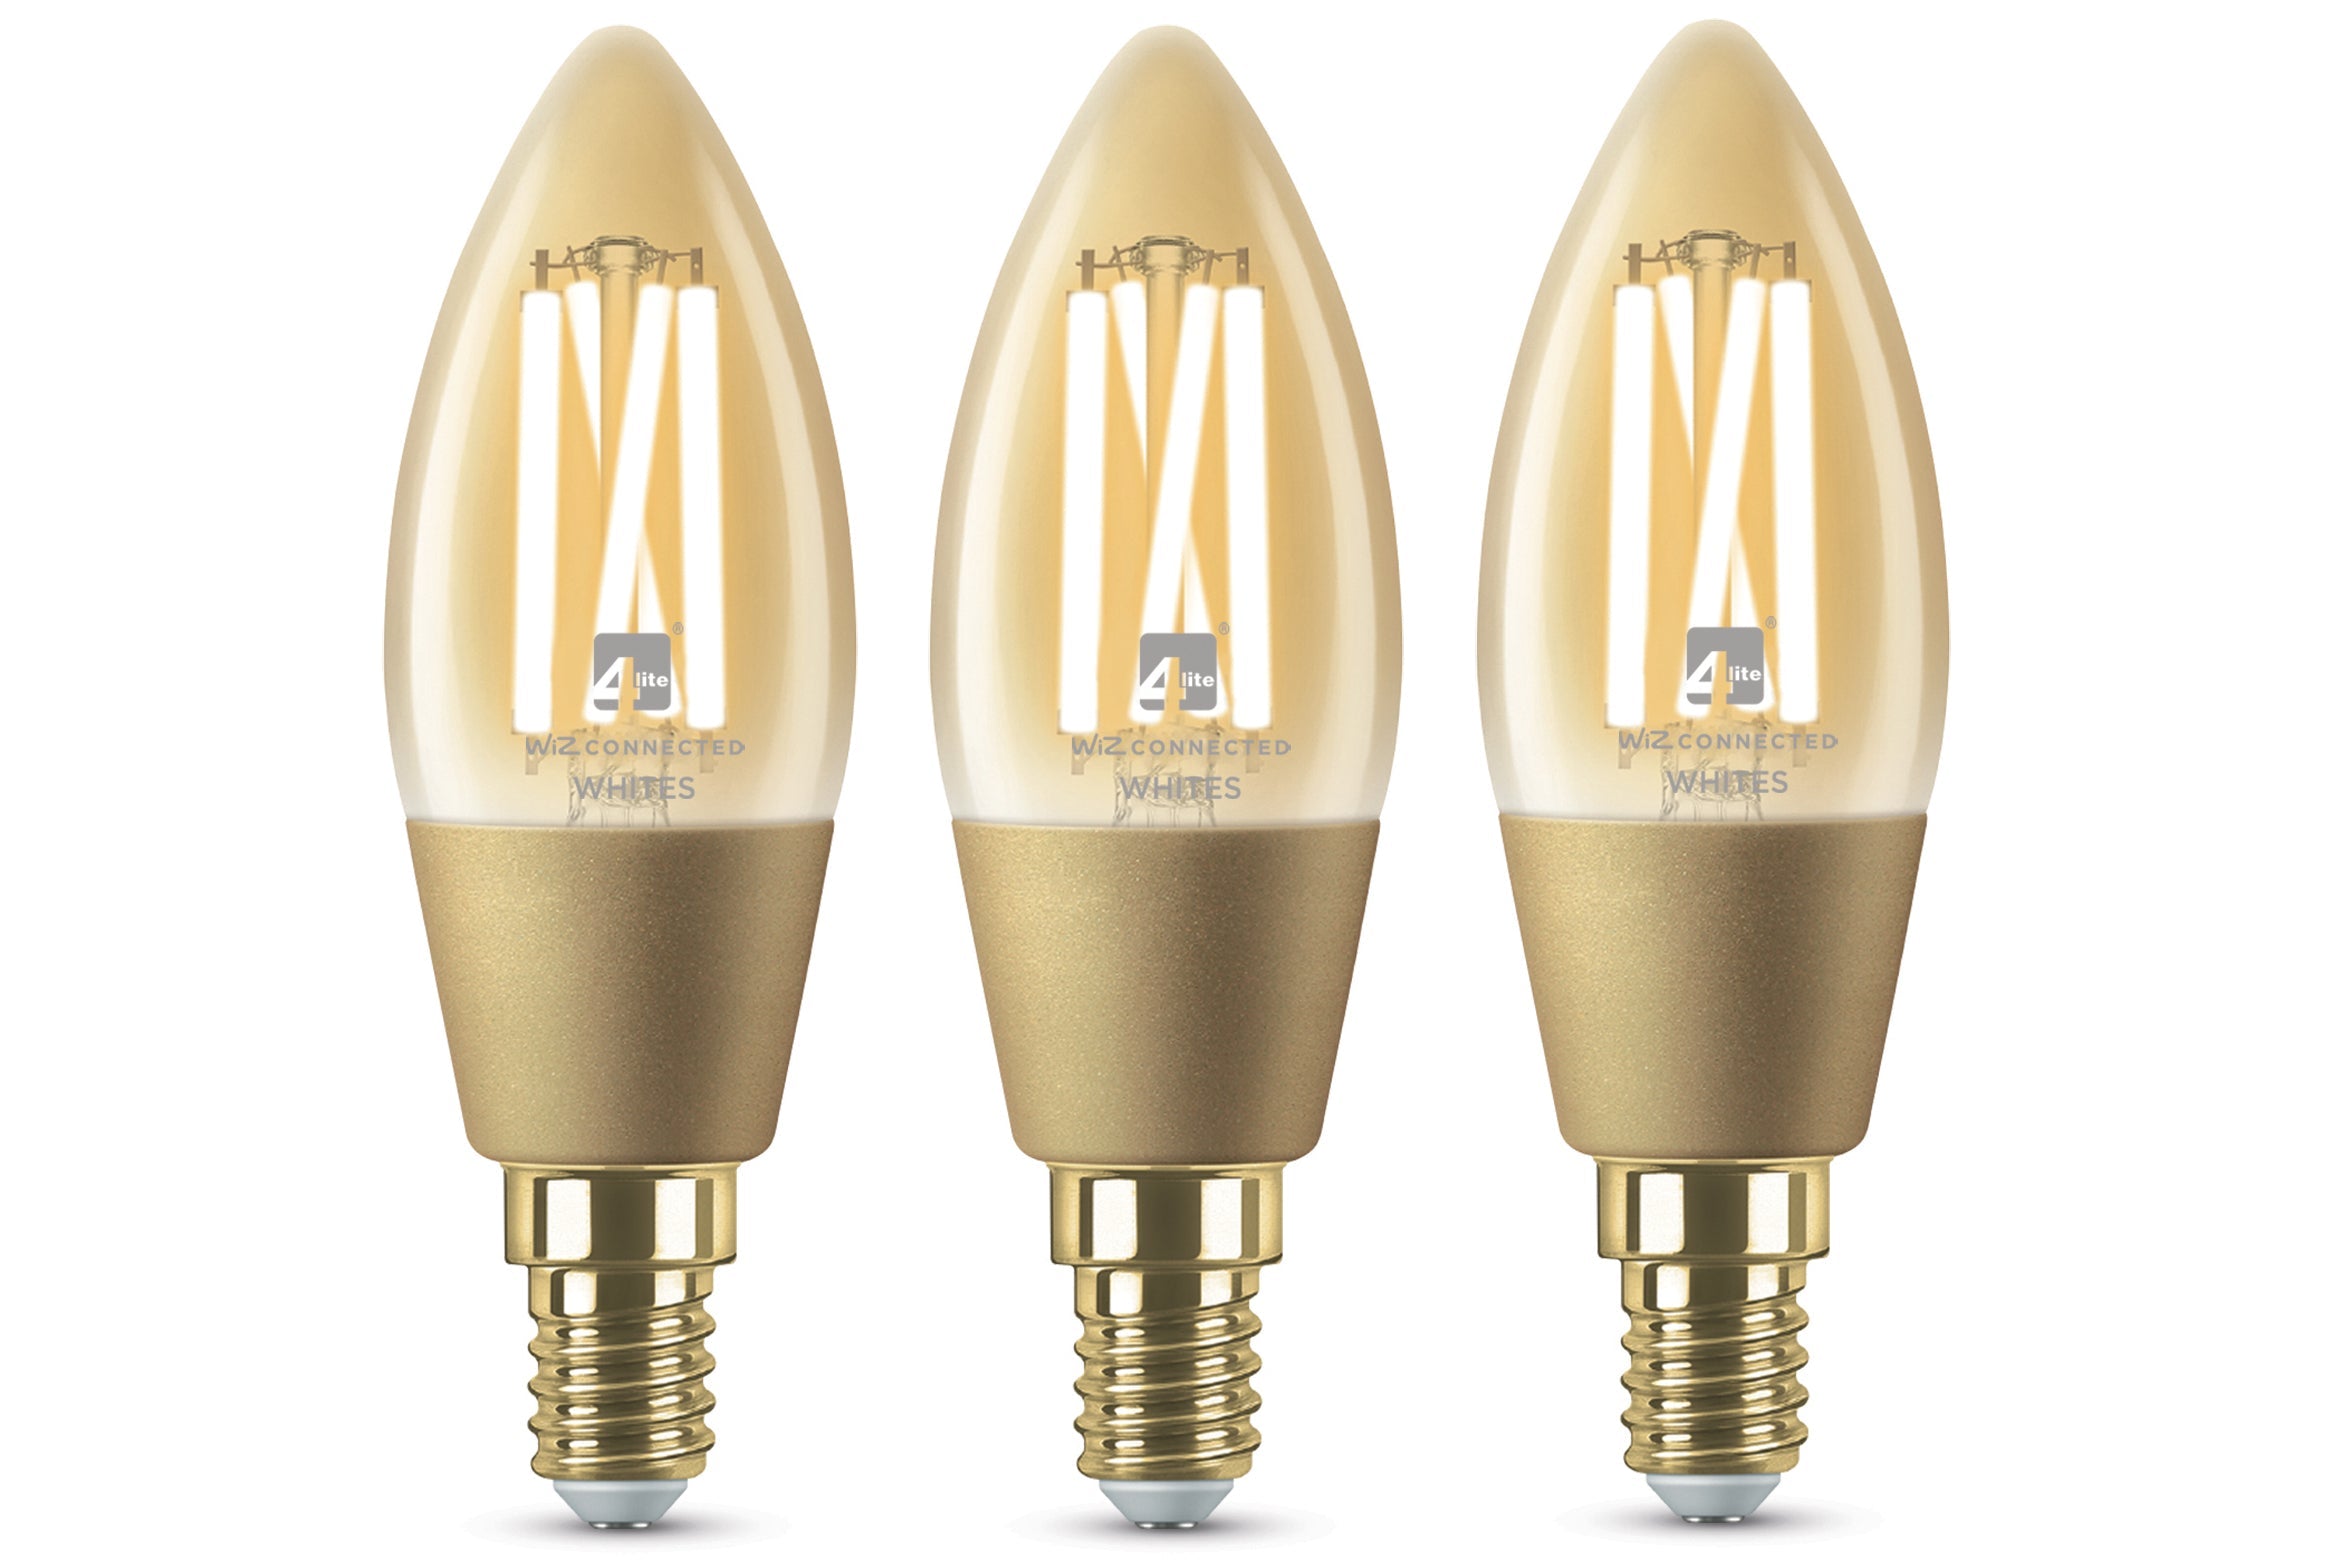 4lite WiZ Connected C35 Candle Filament Amber WiFi LED Smart Bulb - E14 Small Screw (Pack of 3)